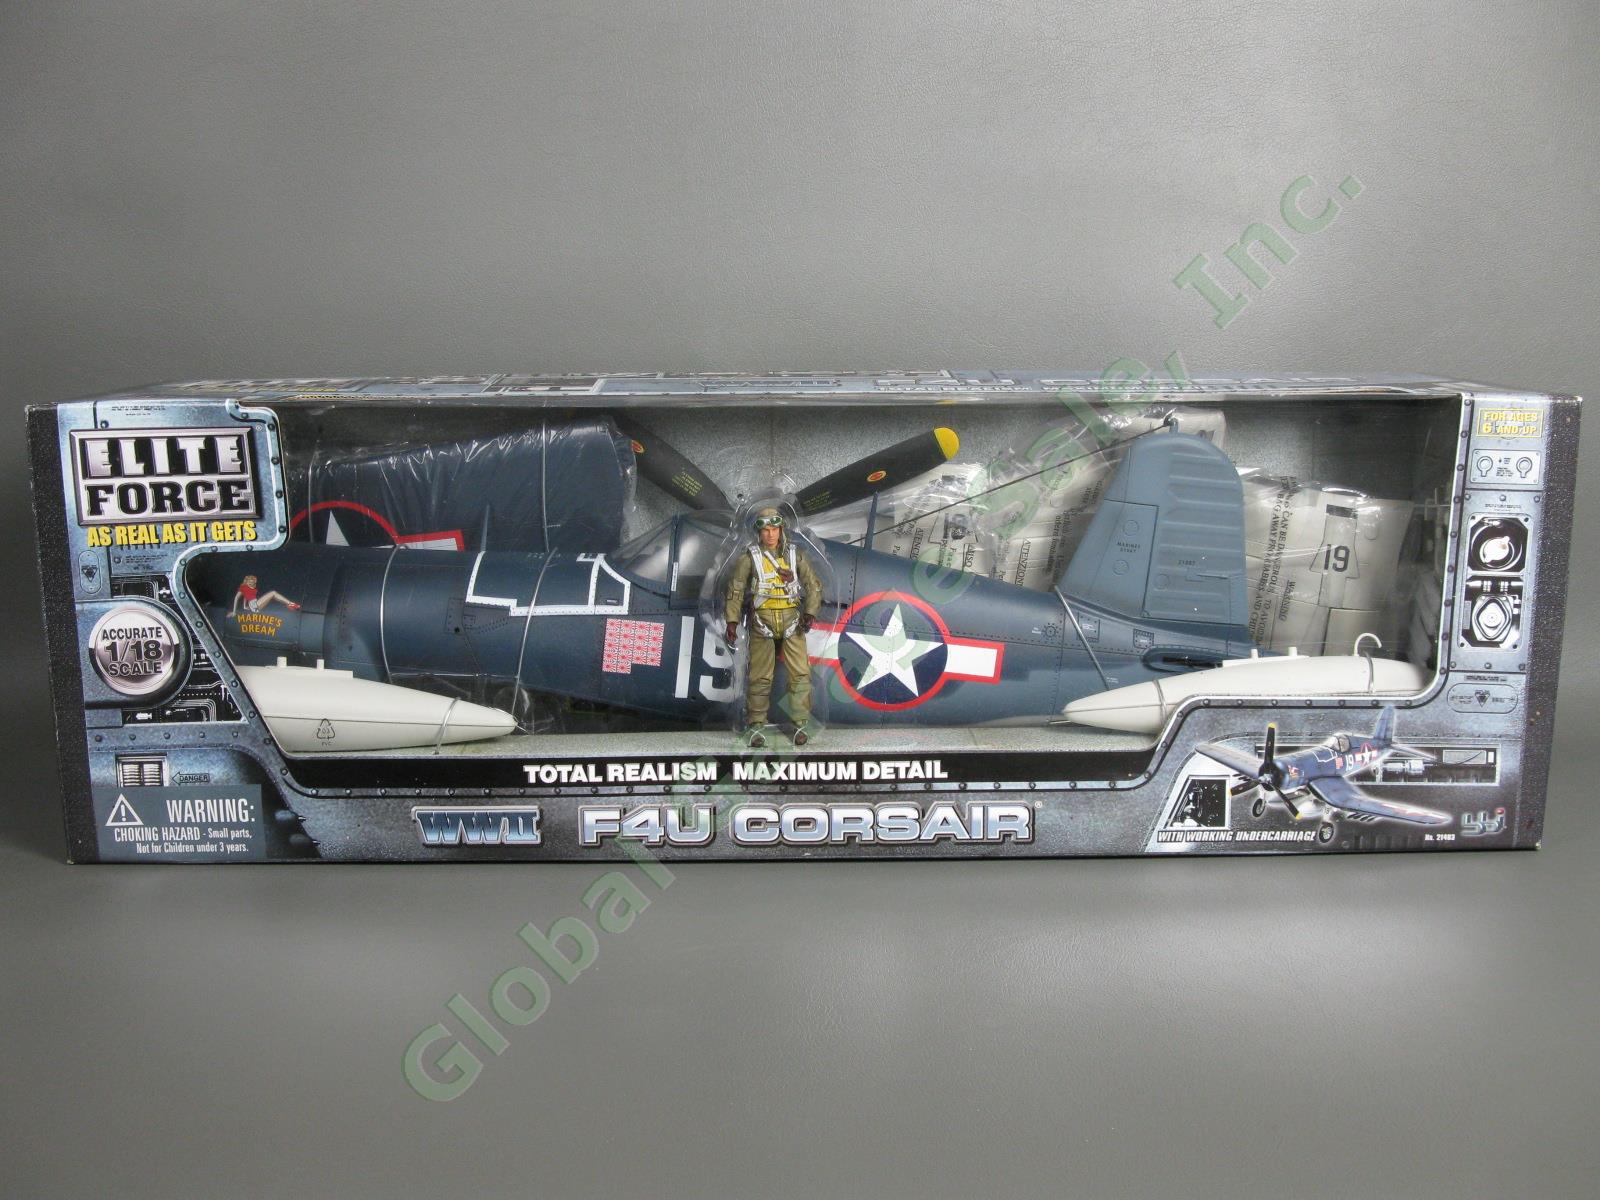 Elite Force WWII F4U Corsair 1:18 Scale Daisy June Model Toy Fighter Airplane NR